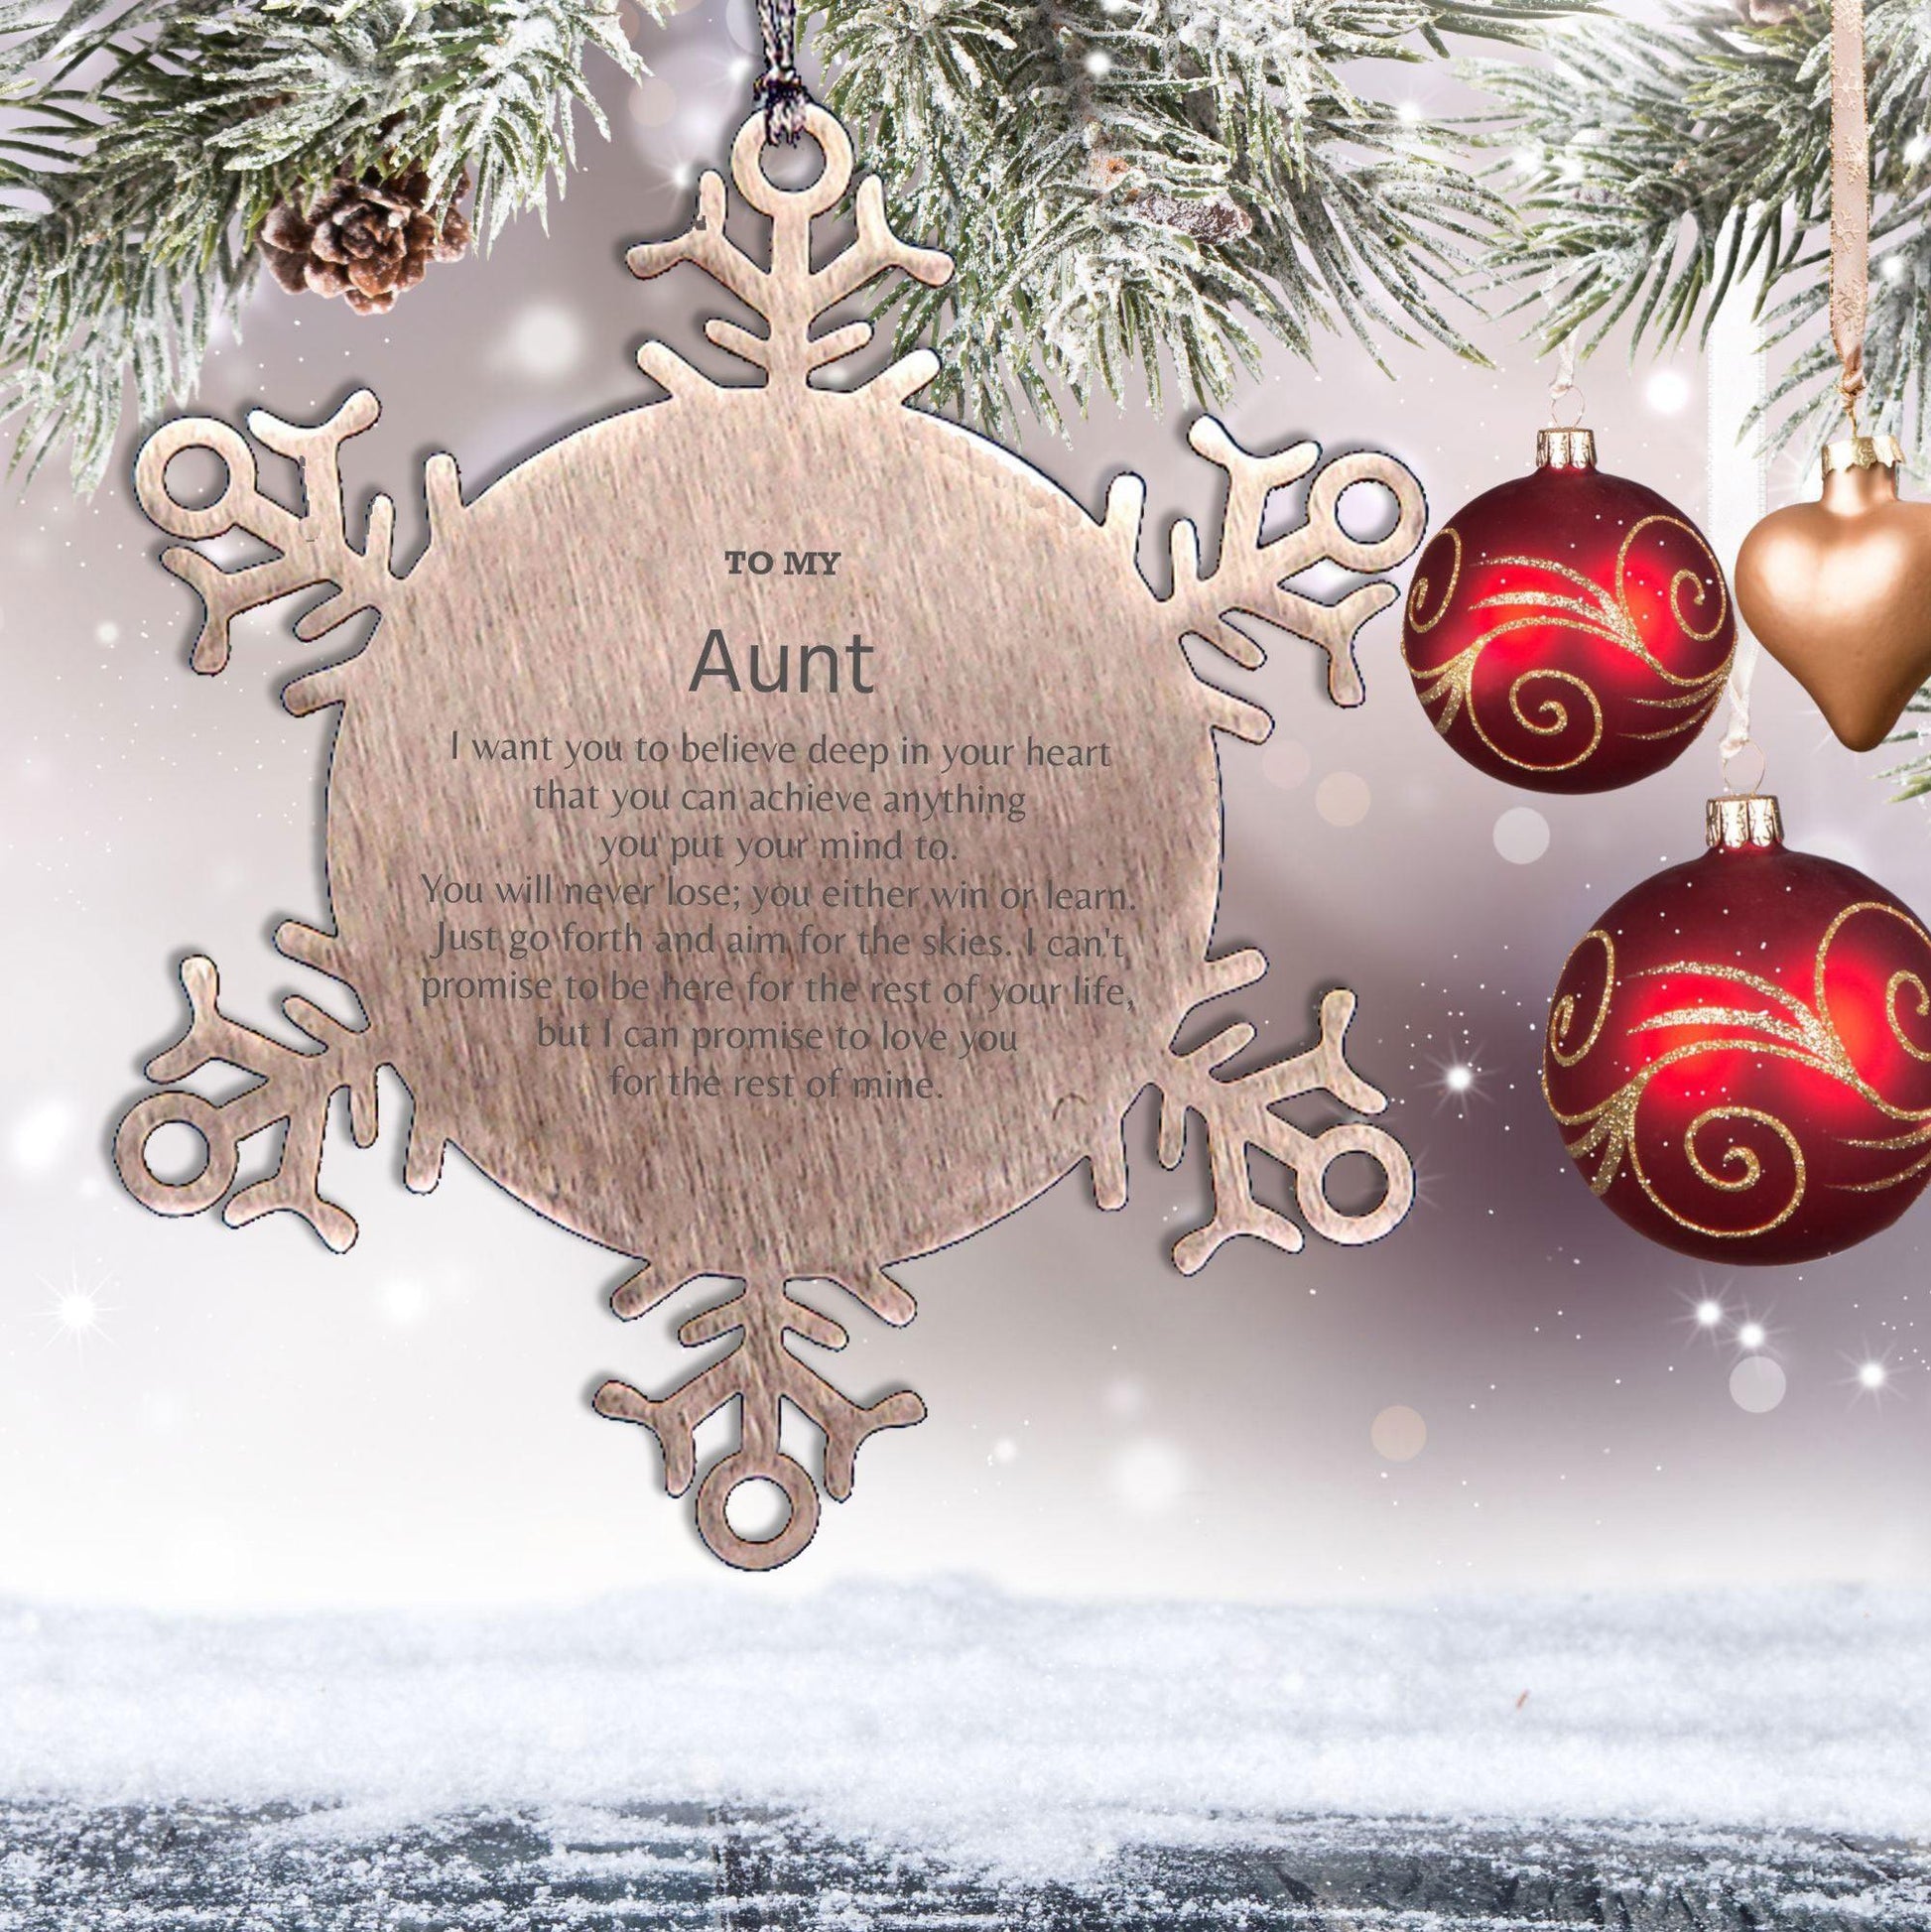 Motivational Aunt Snowflake Christmas Ornament I can promise to love you for the rest of mine Birthday Gifts - Mallard Moon Gift Shop